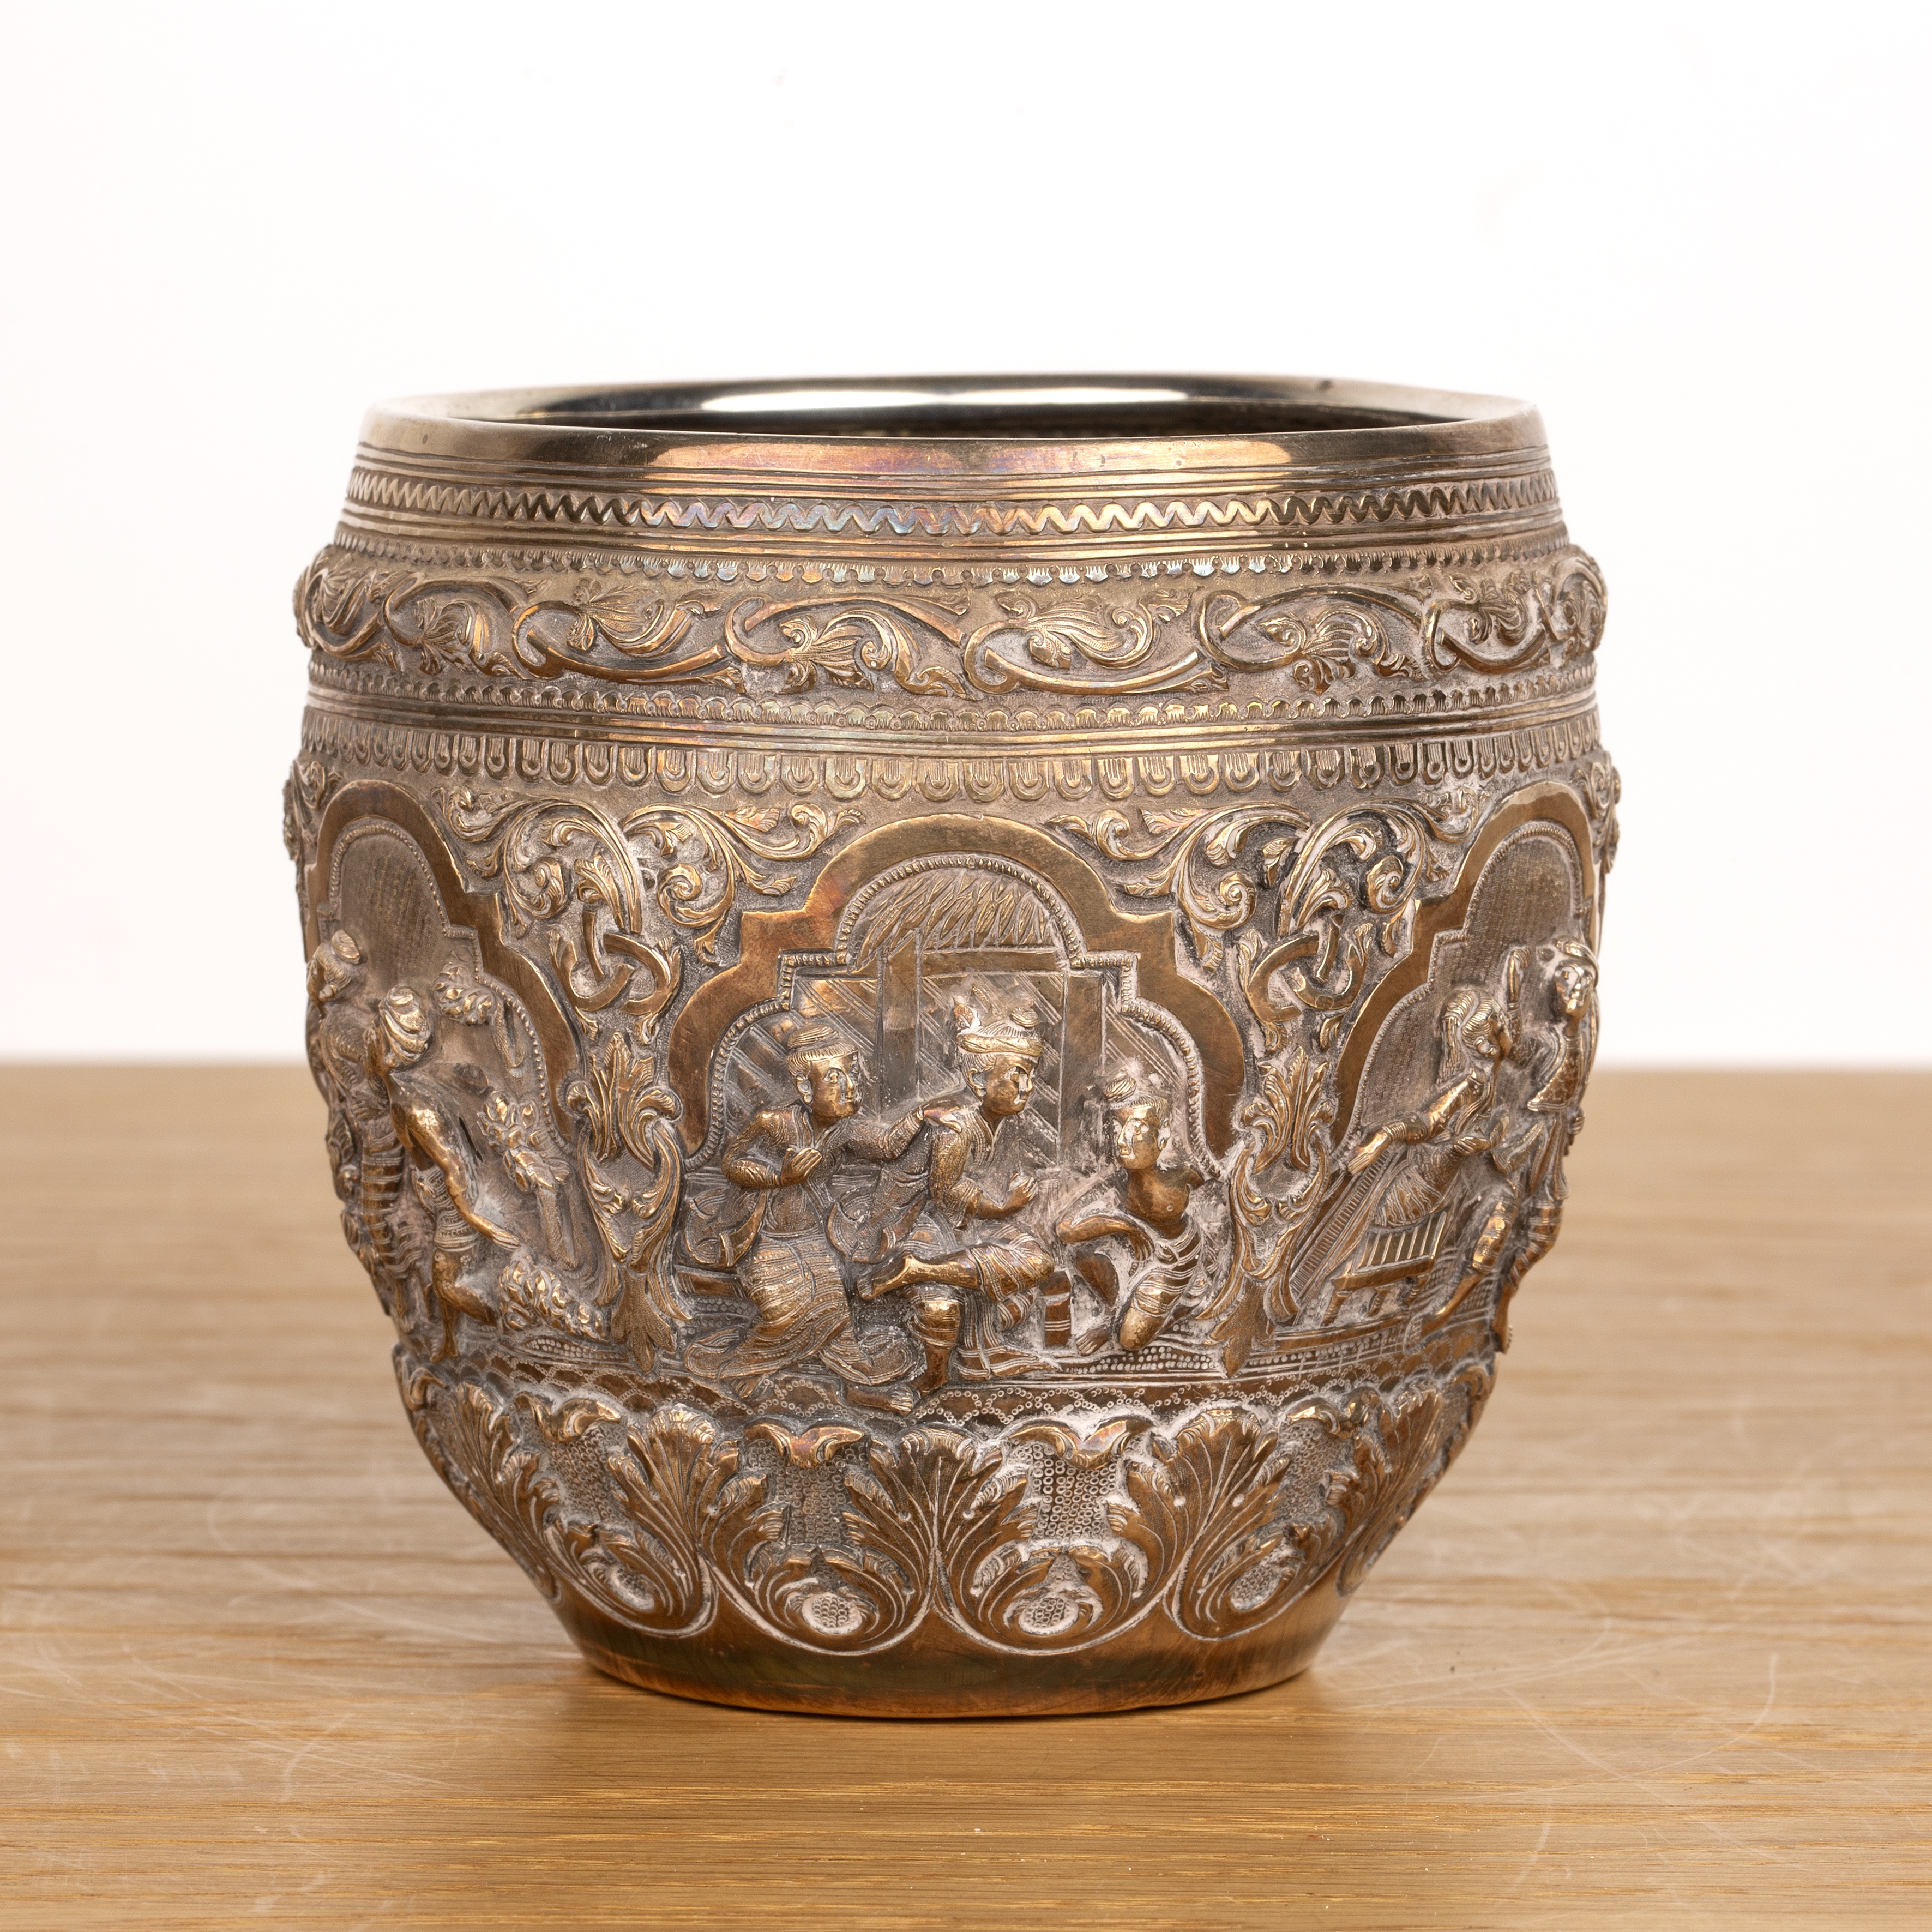 Silver repousse thabiek bowl Burmese, late 19th Century with scenes from Burmese folklore set - Image 2 of 6